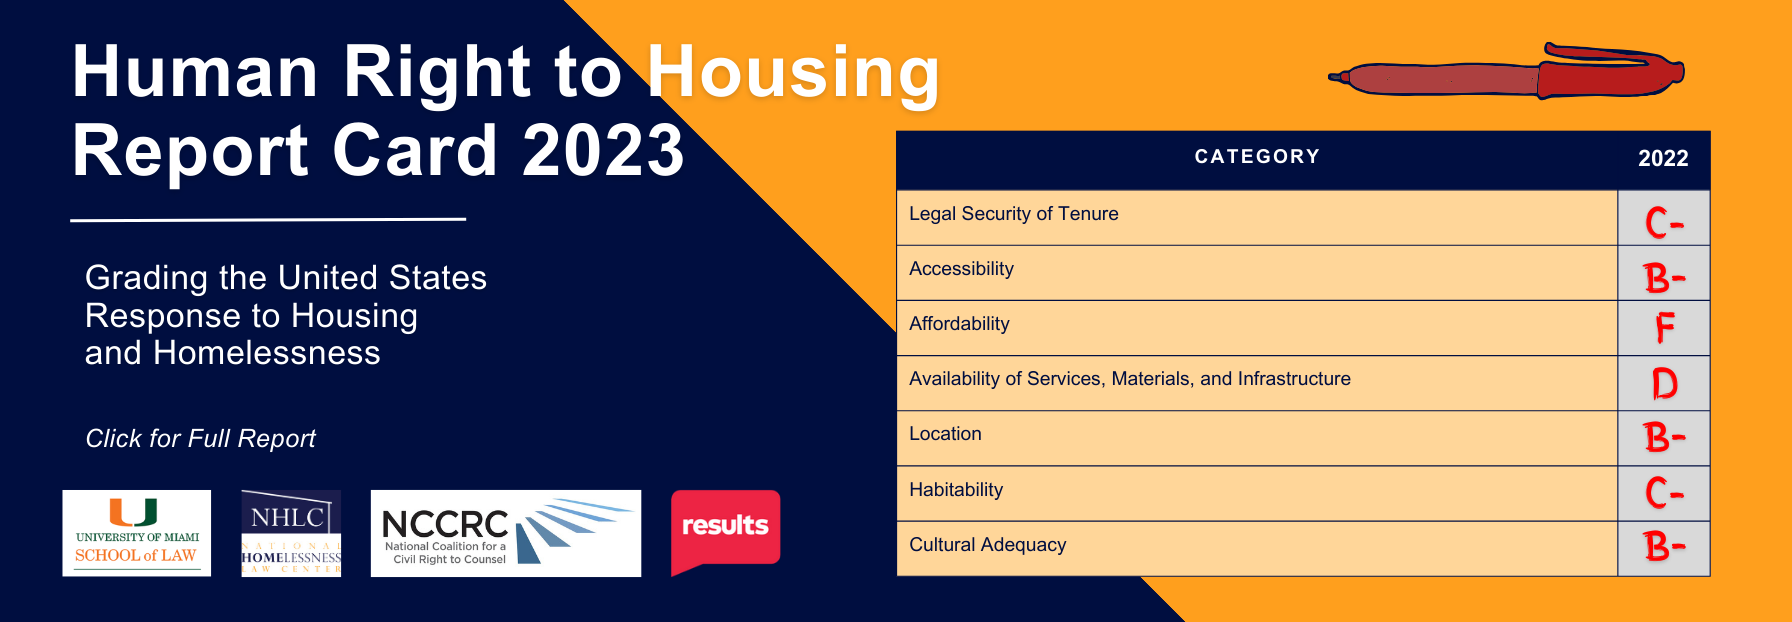 Graphic advertising the Human Right to Housing Report Card, grading the United States response to housing and homelessness. Click for full report.